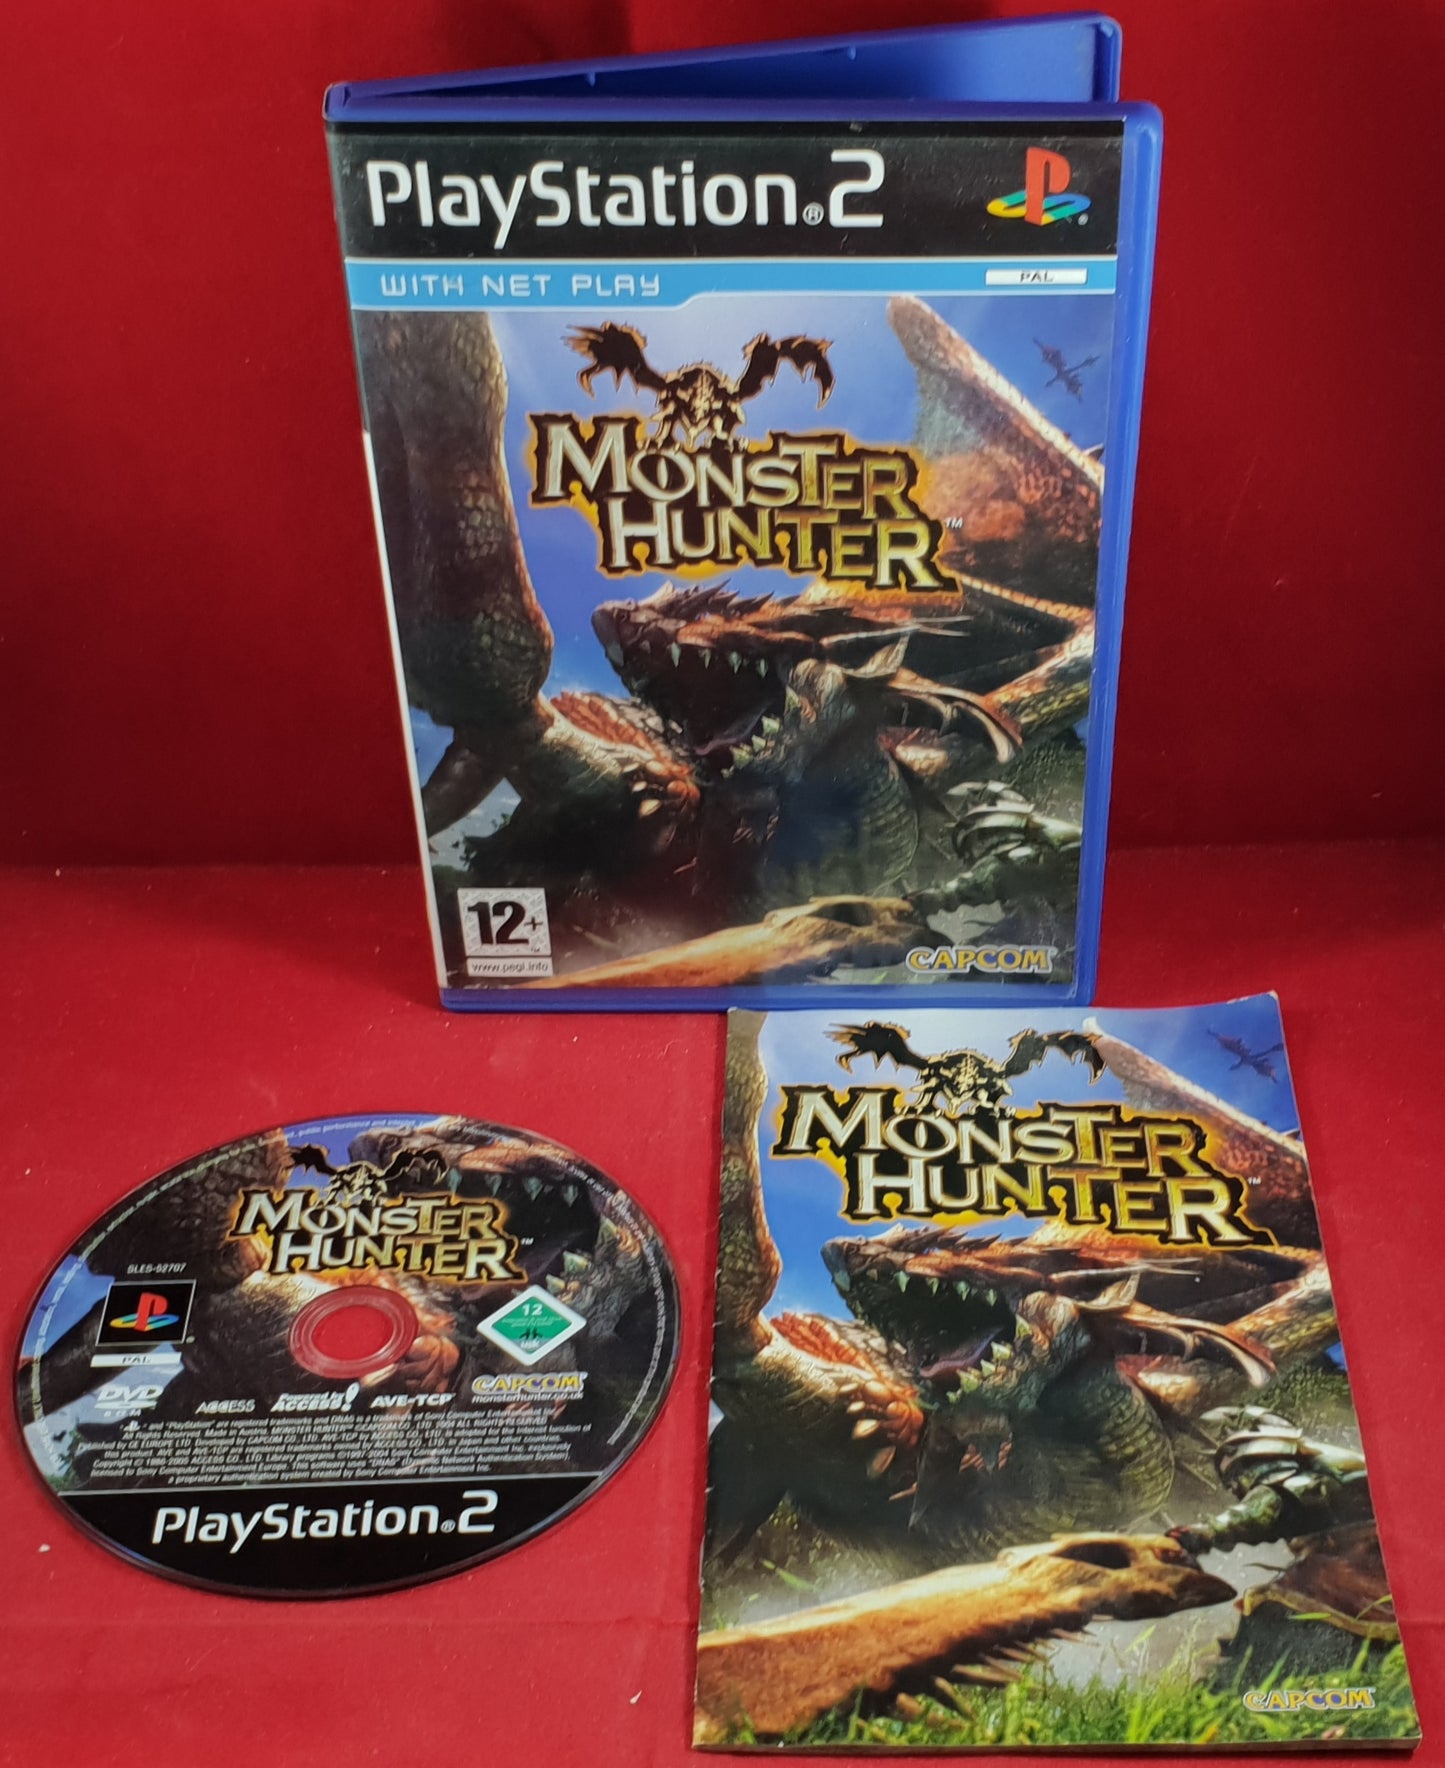 Monster Hunter Sony Playstation 2 (PS2) Game